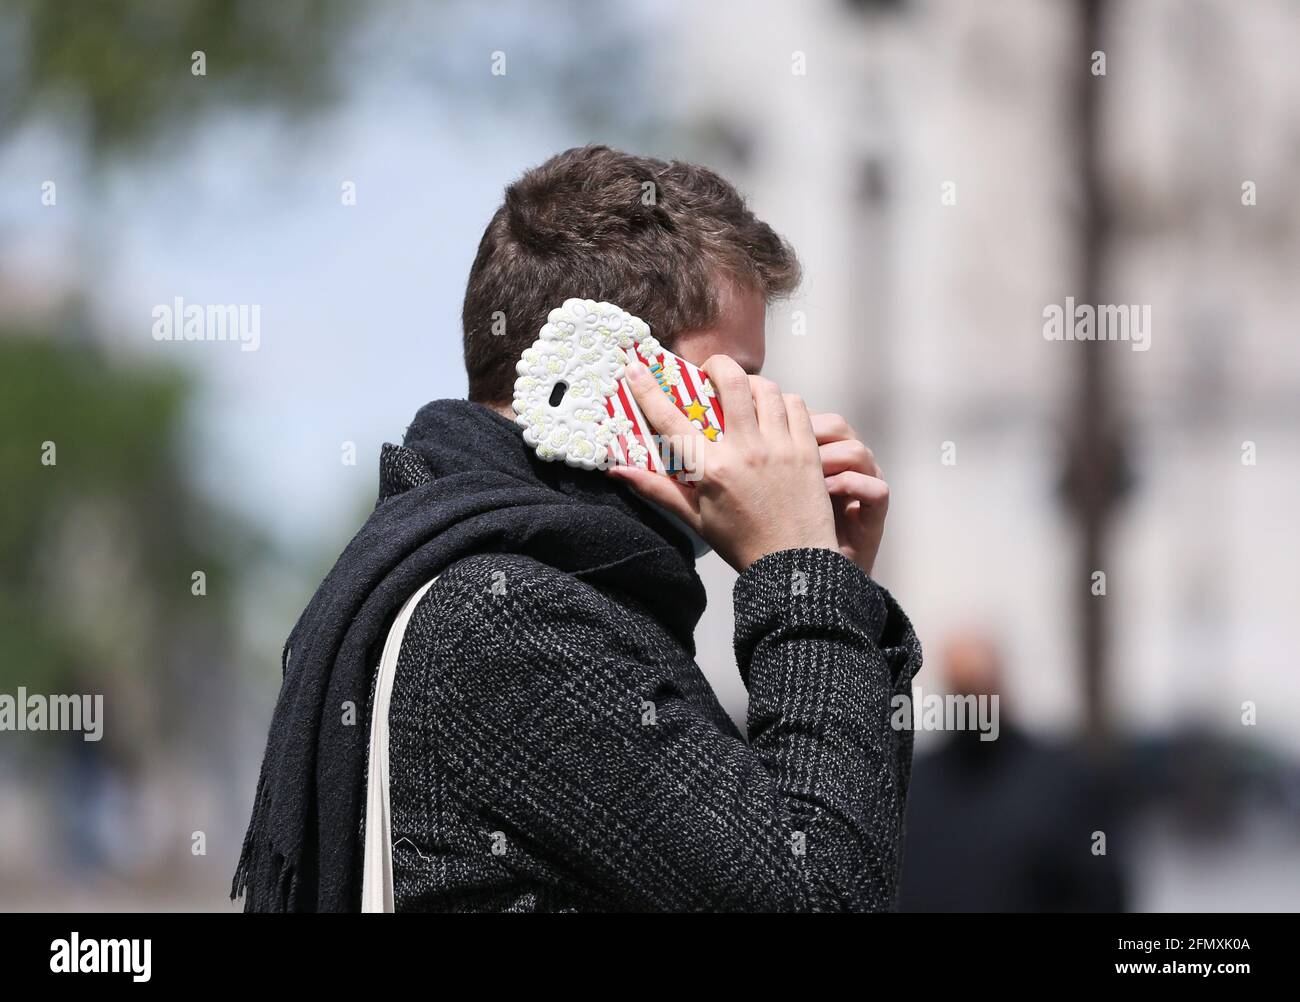 PARIS, May 12, 2021 (Xinhua) -- A man makes a phone call near the Arc de Triomphe in Paris, France, May 12, 2021. France is on its way to coming out of the health crisis as COVID-19 indicators continue the downward trend and vaccine rollout is speeding up, according to French Prime Minister Jean Castex. (Xinhua/Gao Jing) Stock Photo